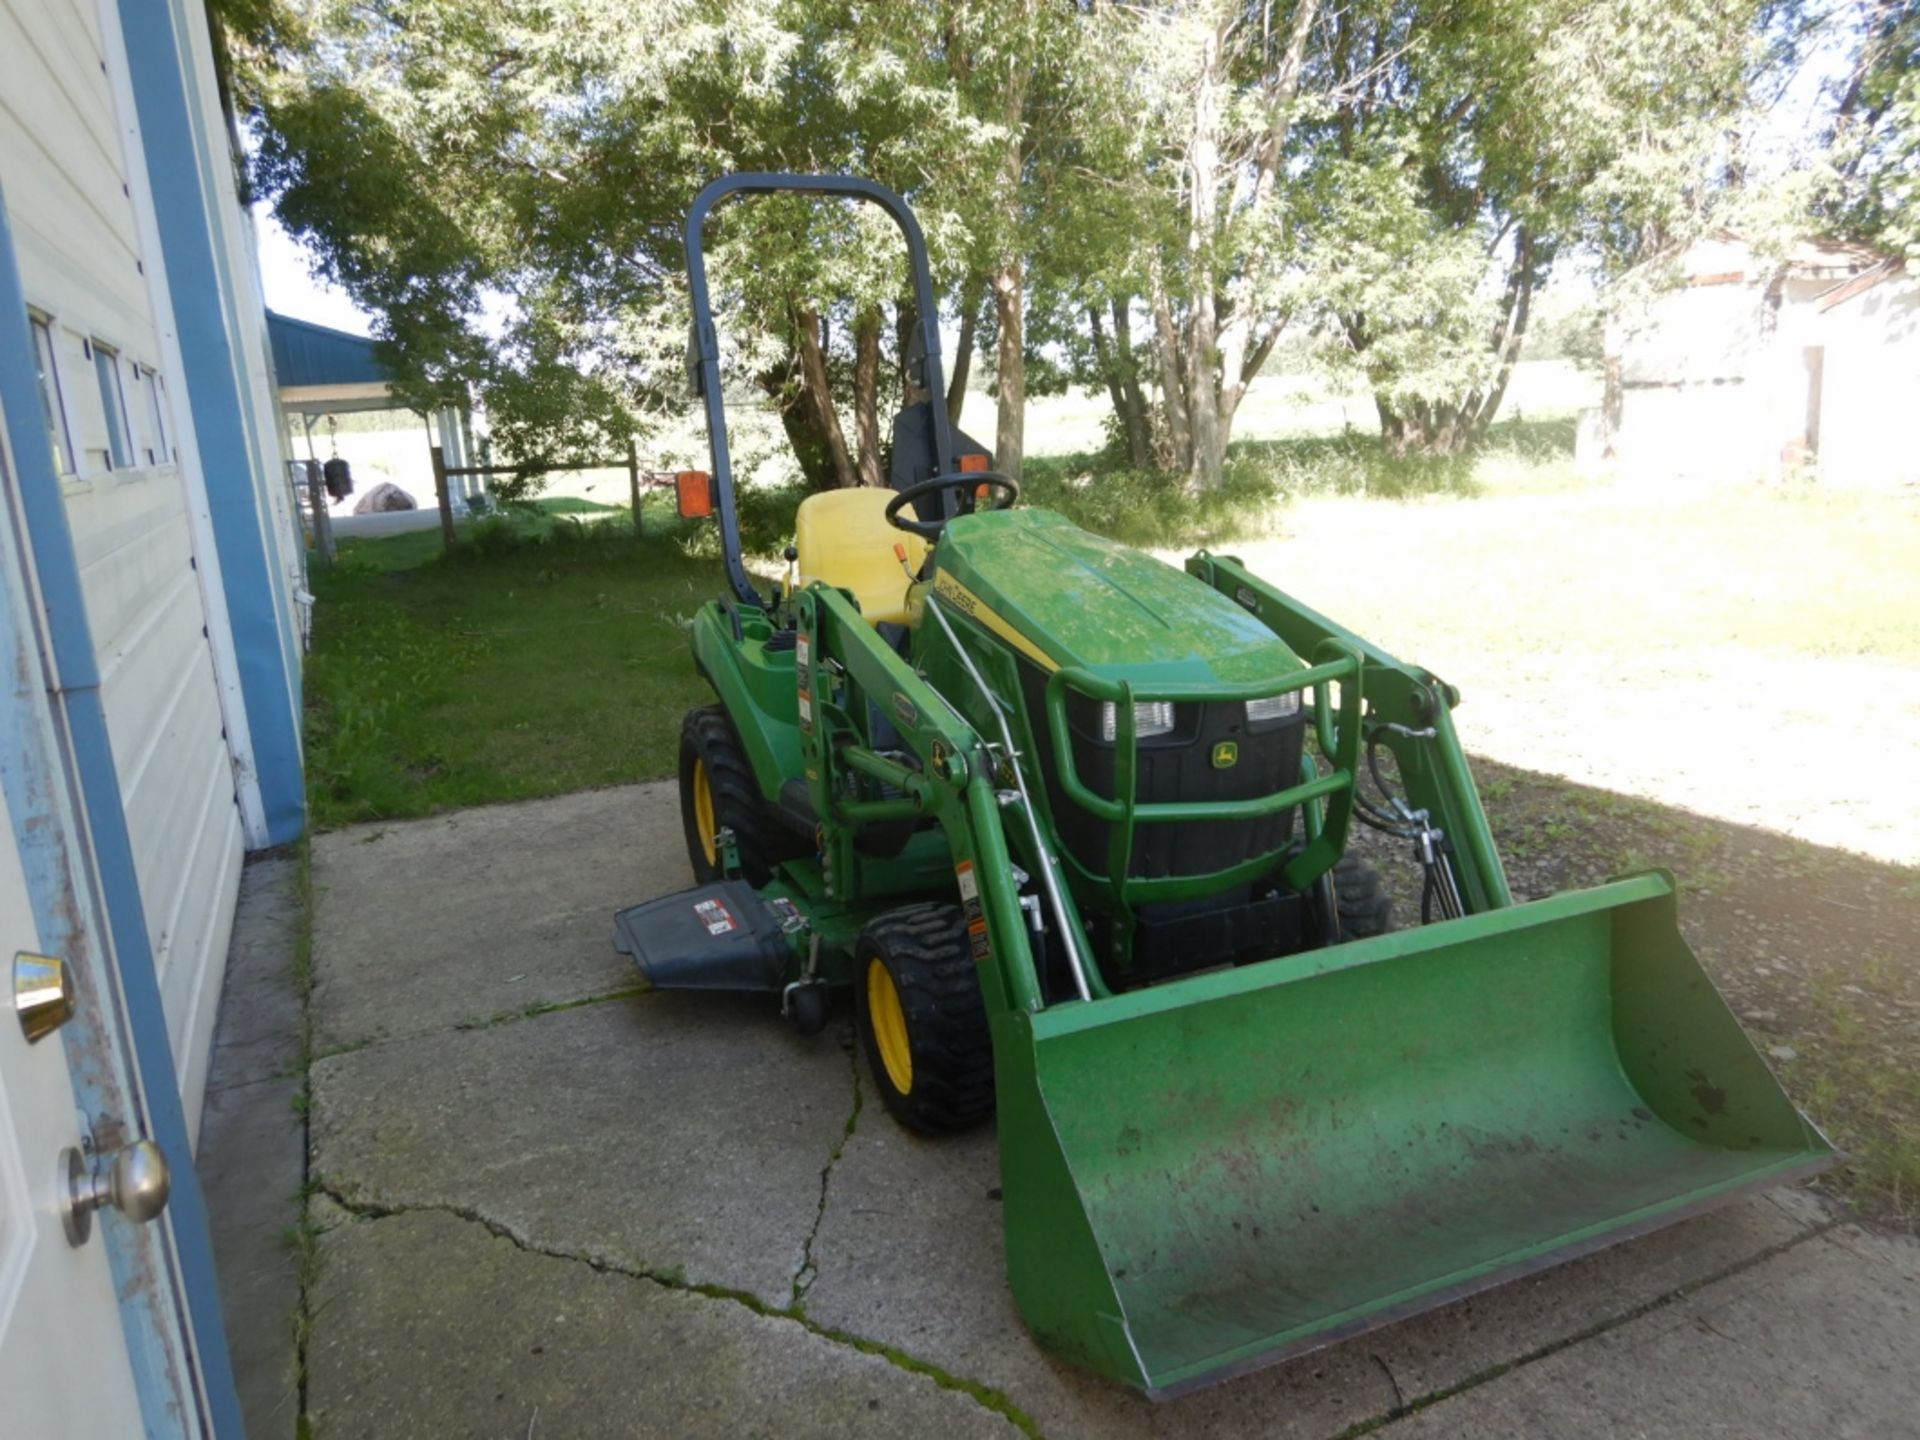 2012 JOHN DEERE 1023E 4WD COMPACT TRACTOR W/ FRONT END LOADER, 3 HYDRAULICS, DELUXE HOOD GUARD, - Image 2 of 11